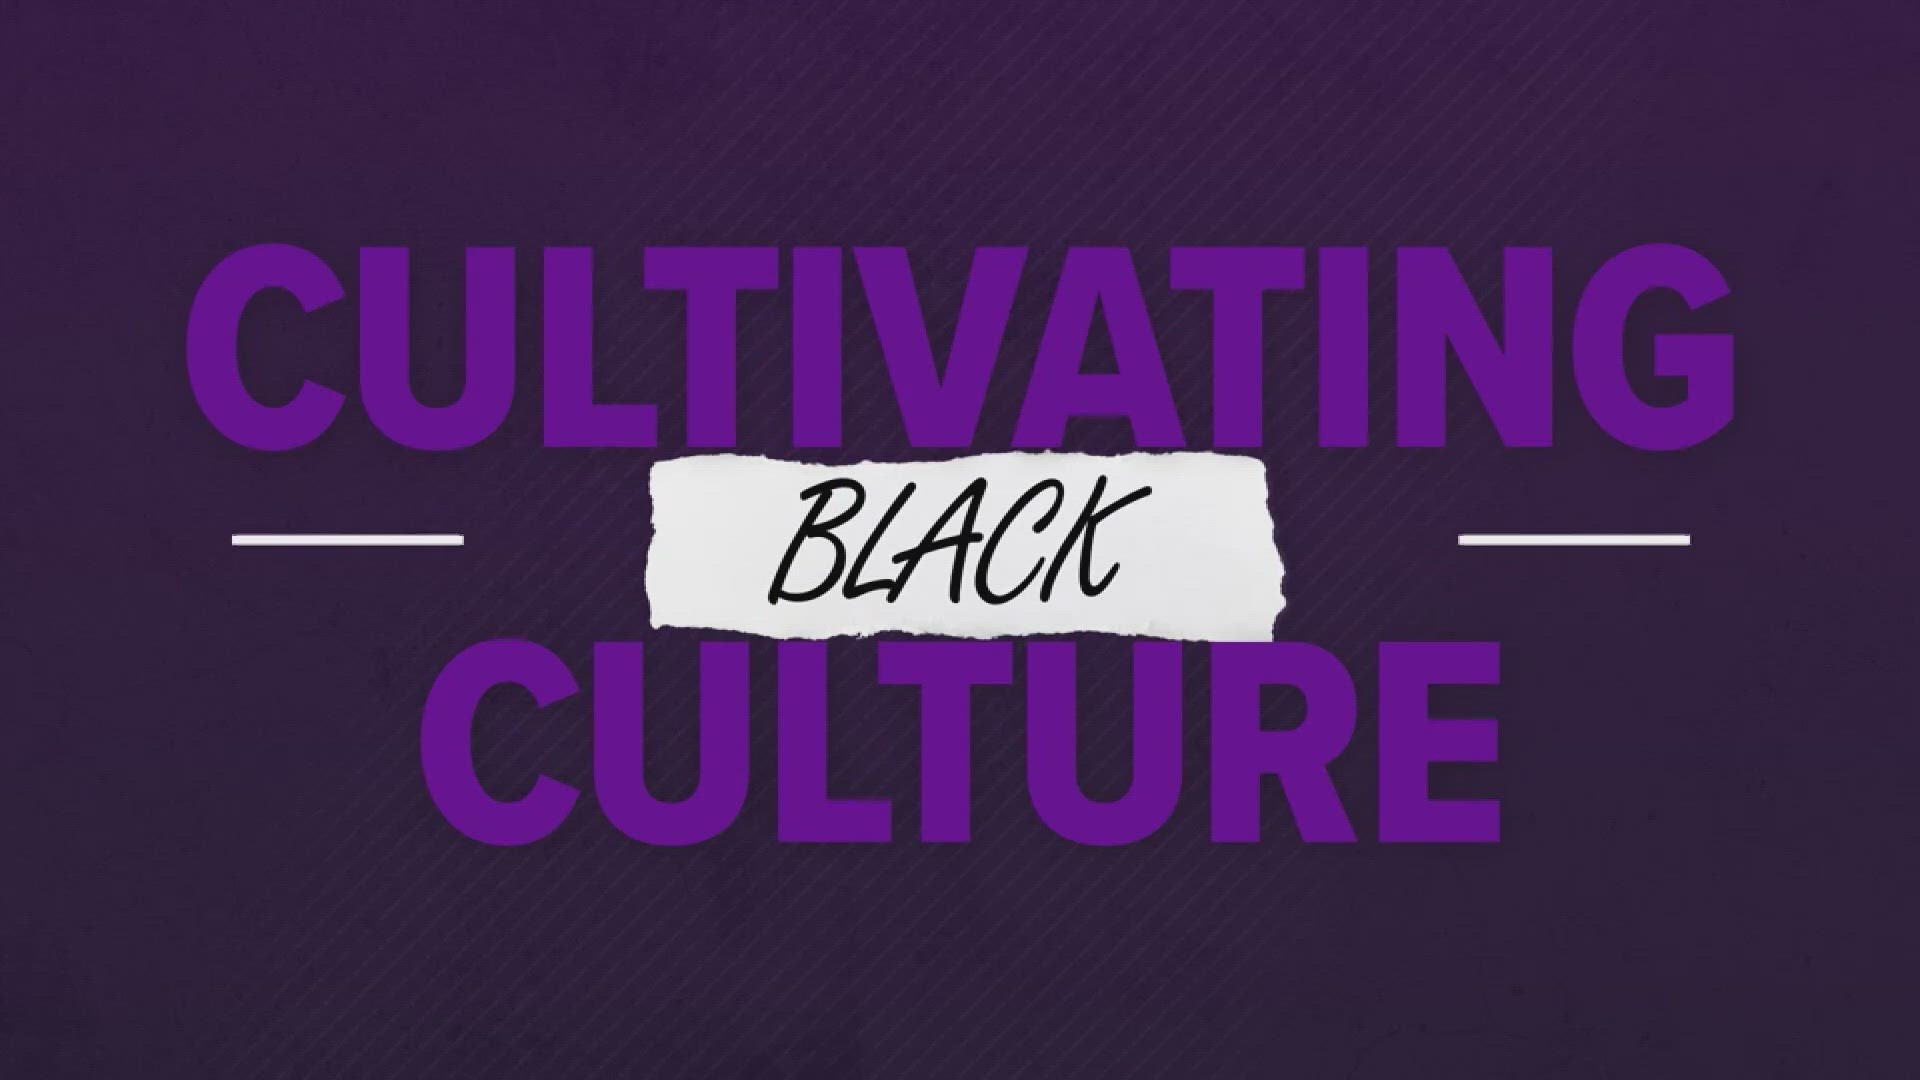 Cultivating Culture shines a light on the rich Black culture in the Pacific Northwest.